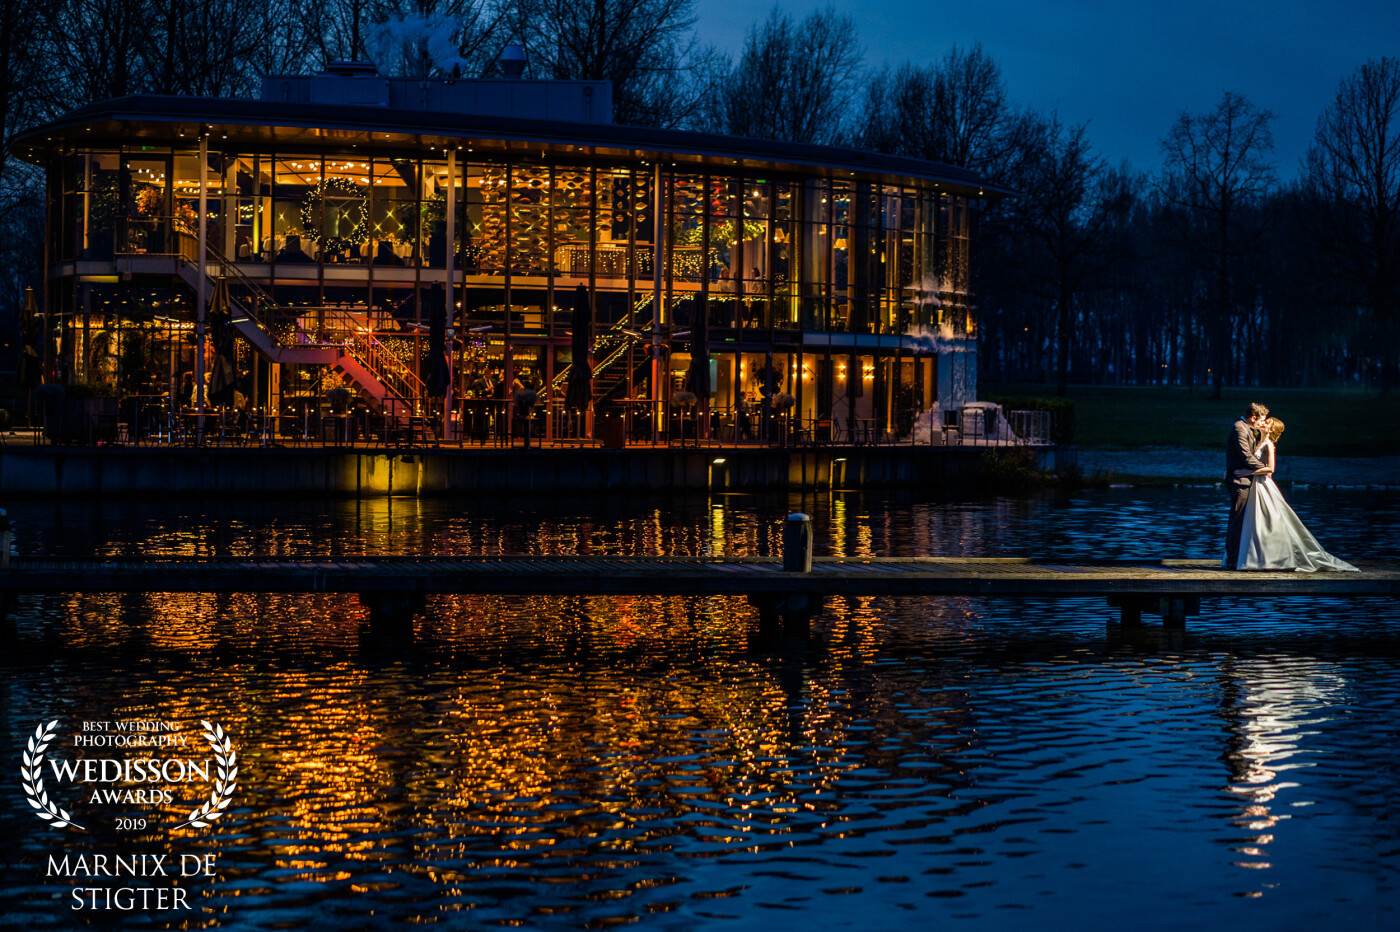 This winter wedding was set at The Boathouse venue which has beautiful lighting. Waiting for the twilight, this created the perfect backdrop for a romantic shot, just before dinner :)